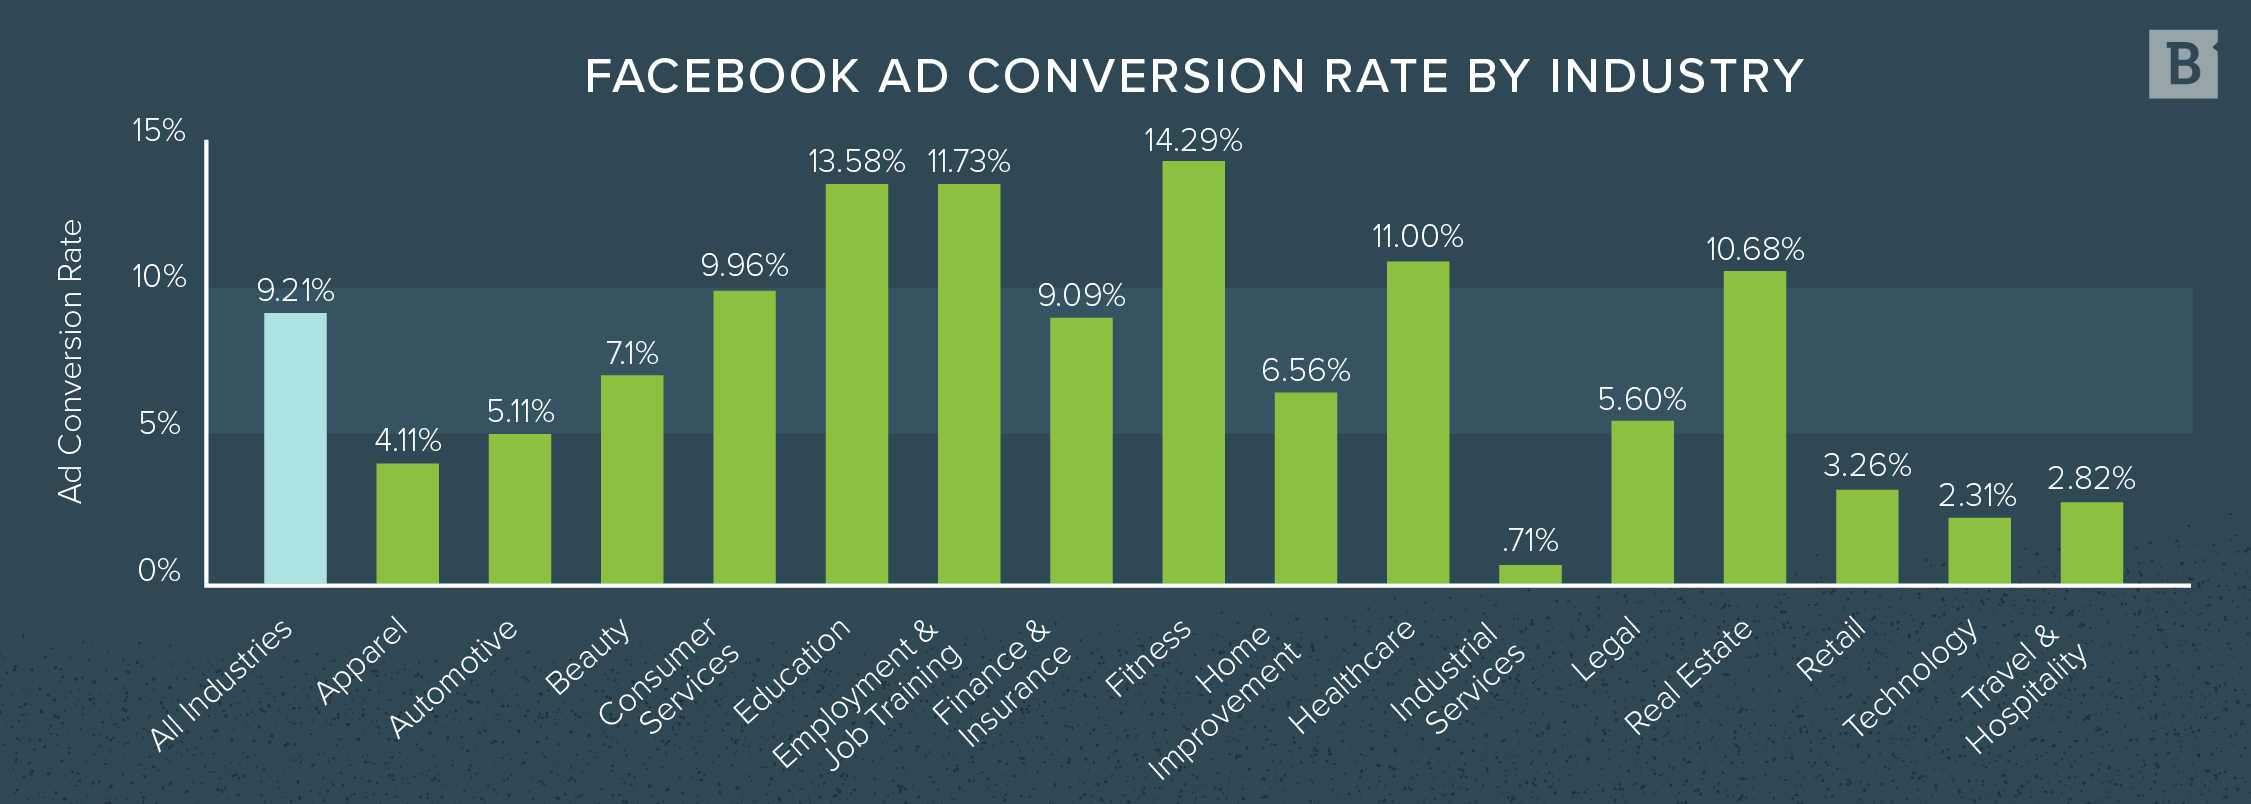 Facebook Ad Conversion Rate by 